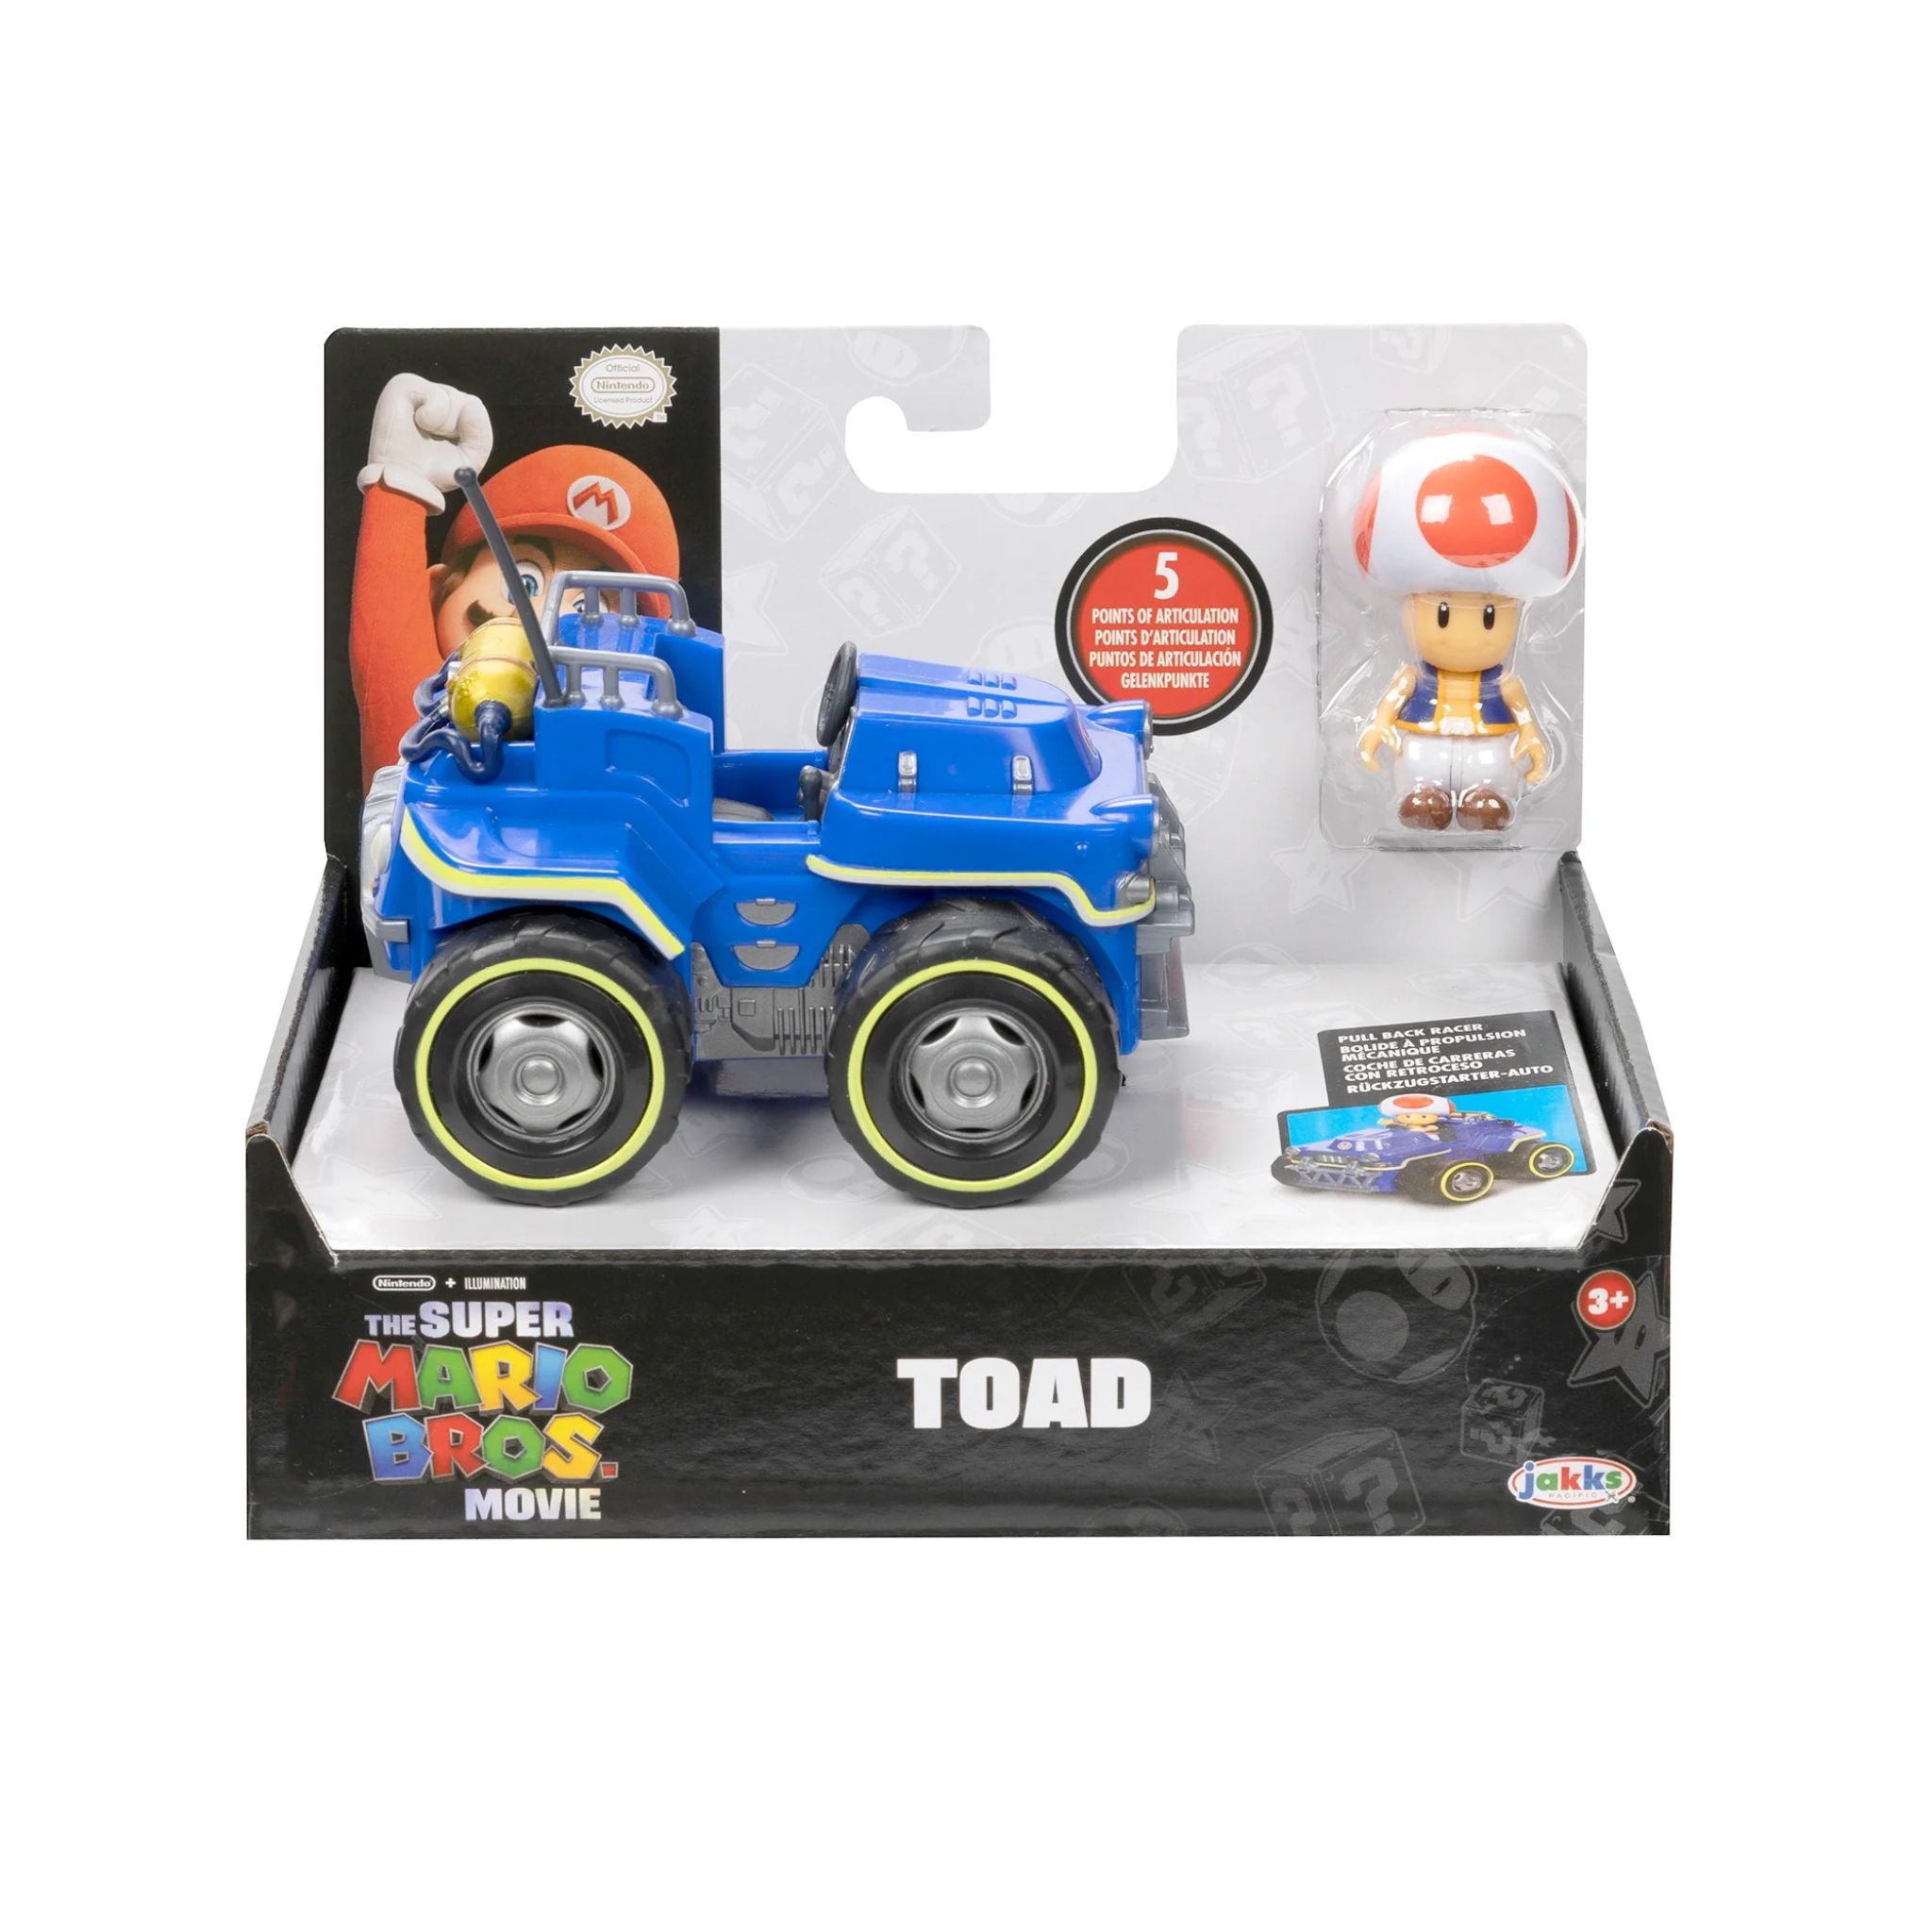 Super Mario Bros. Movie 2.5" Figure with Pull Back Racer - Toad (US-417214-T)